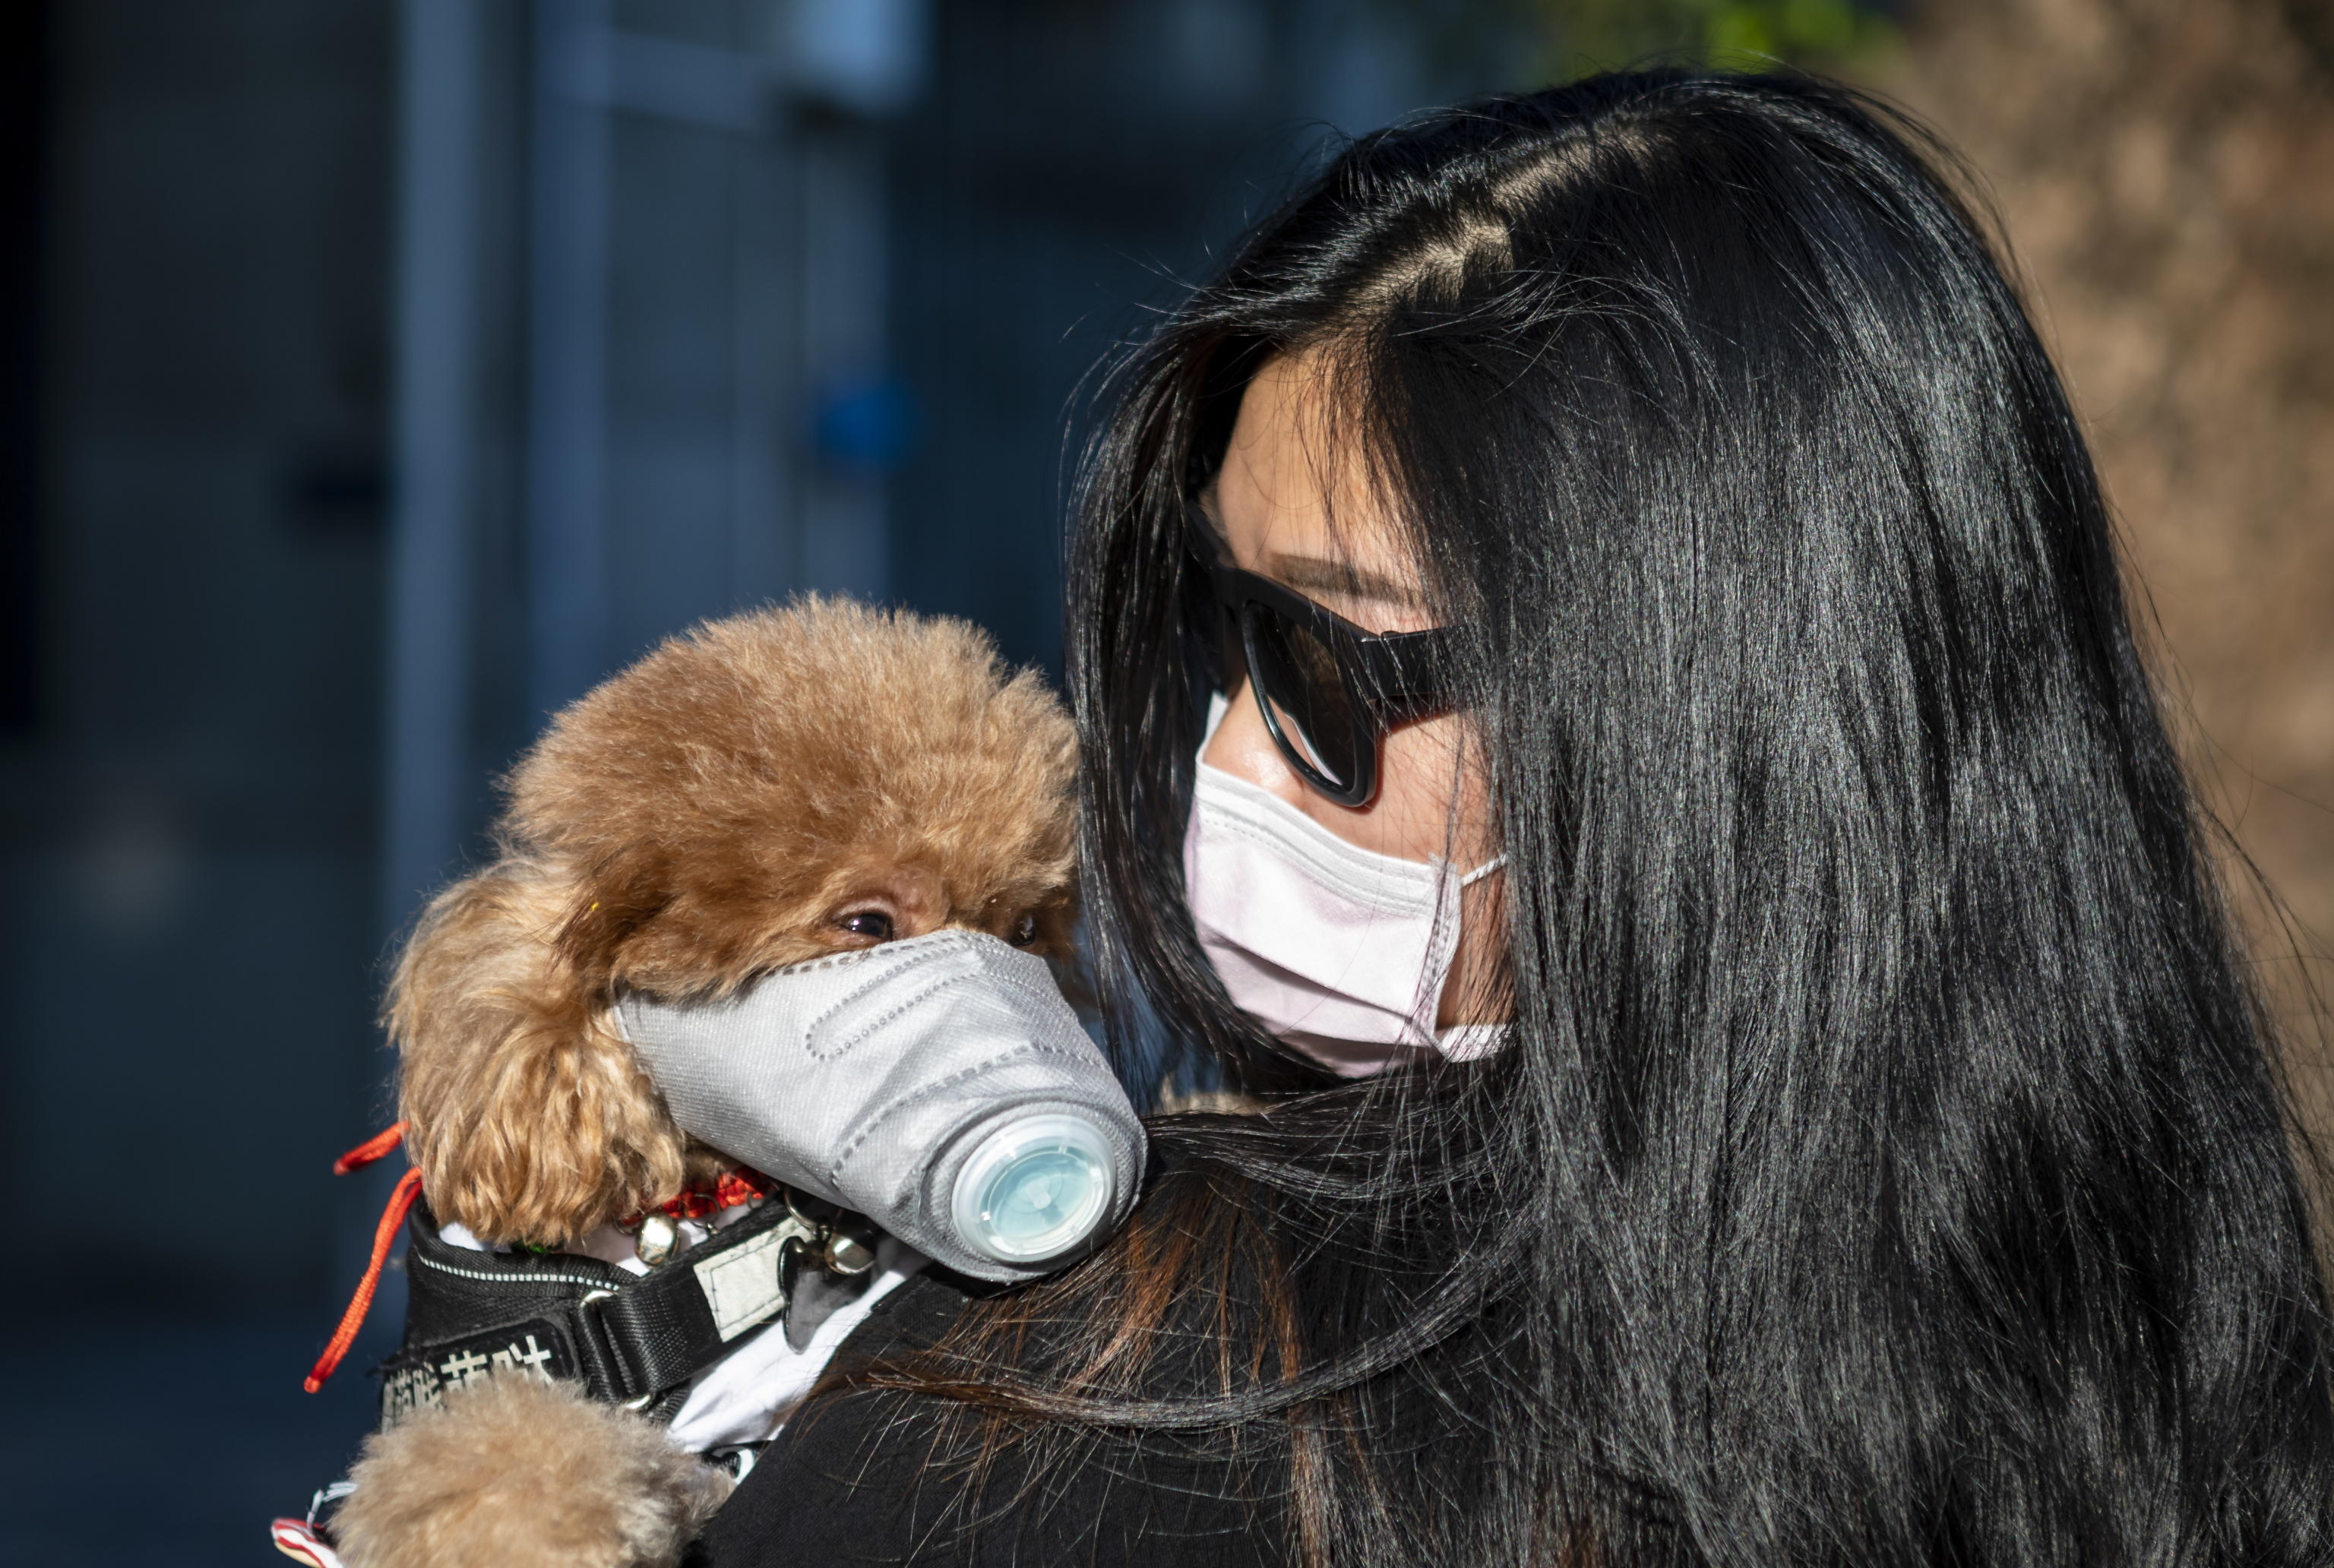 epa08234156 A woman wearing a face mask holds her dog, also wearing a face mask, in Guangzhou, Guangdong, China, 21 February 2020. The disease COVIDF-19, caused by coronavirus SARS-CoV-2, has so far killed 2,247 people with over 76,200 infected worldwide. EPA/ALEX PLAVEVSKI